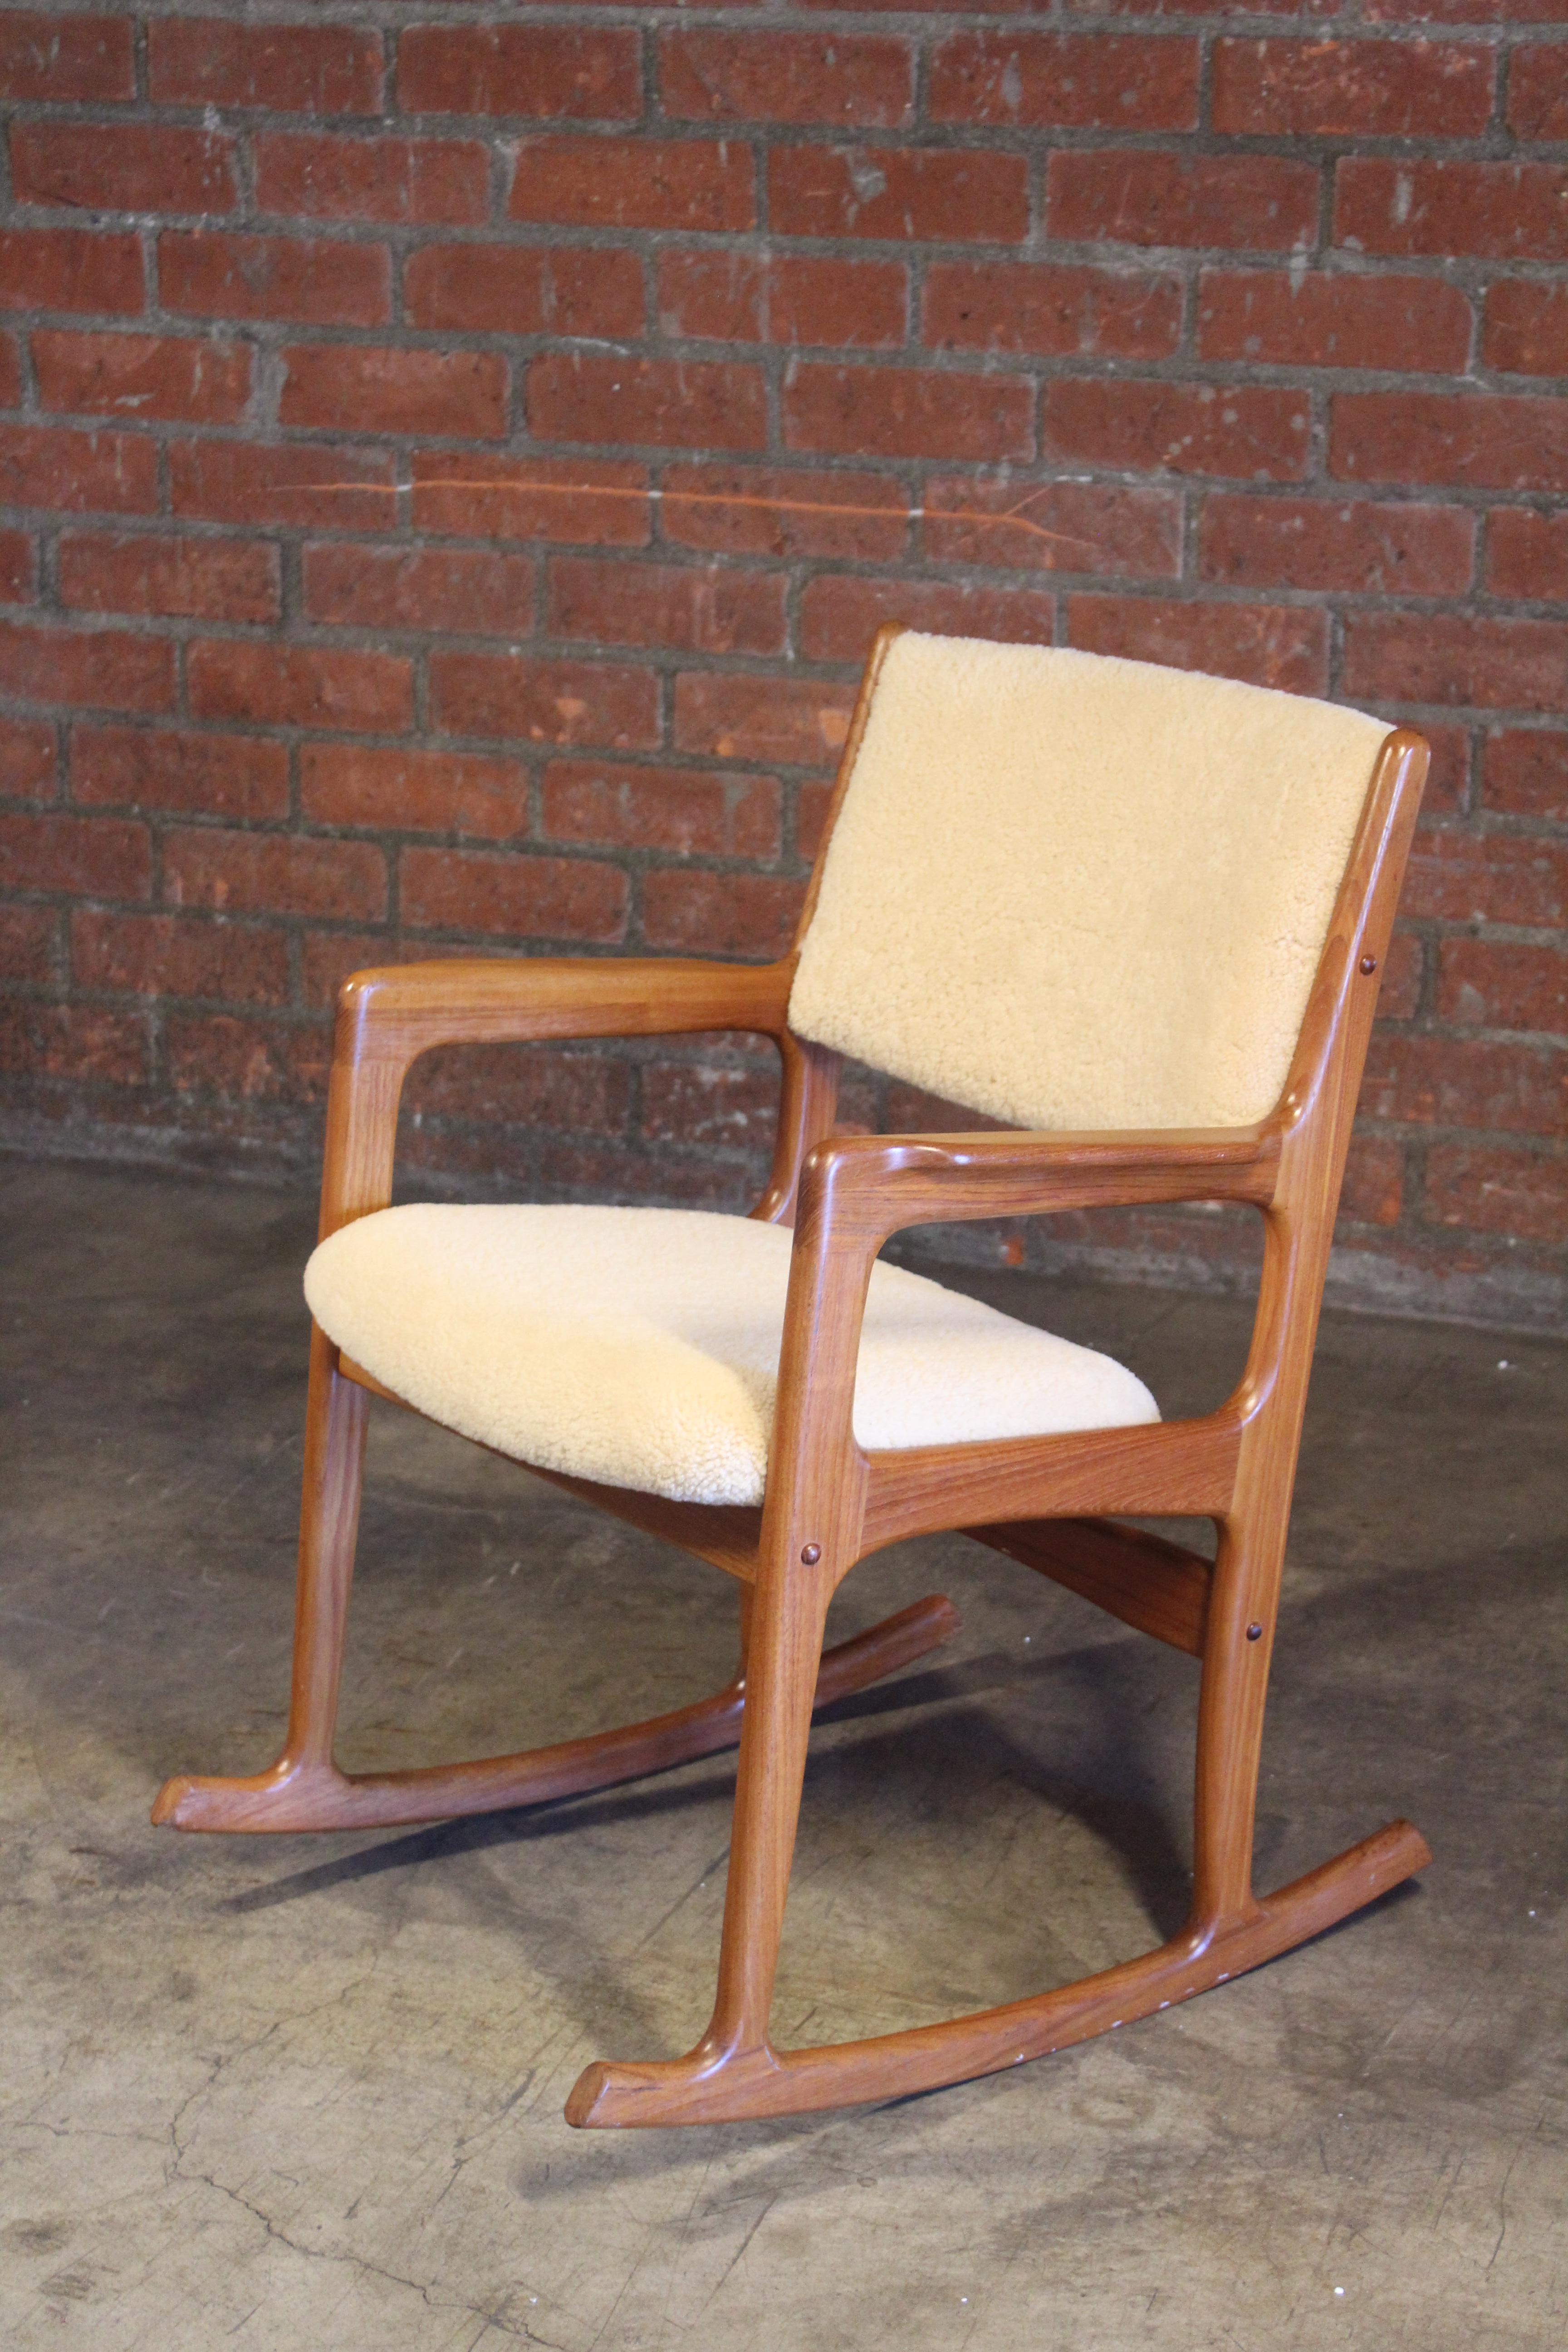 A vintage 1960s teak rocking chair from Denmark, newly upholstered in sheepskin.